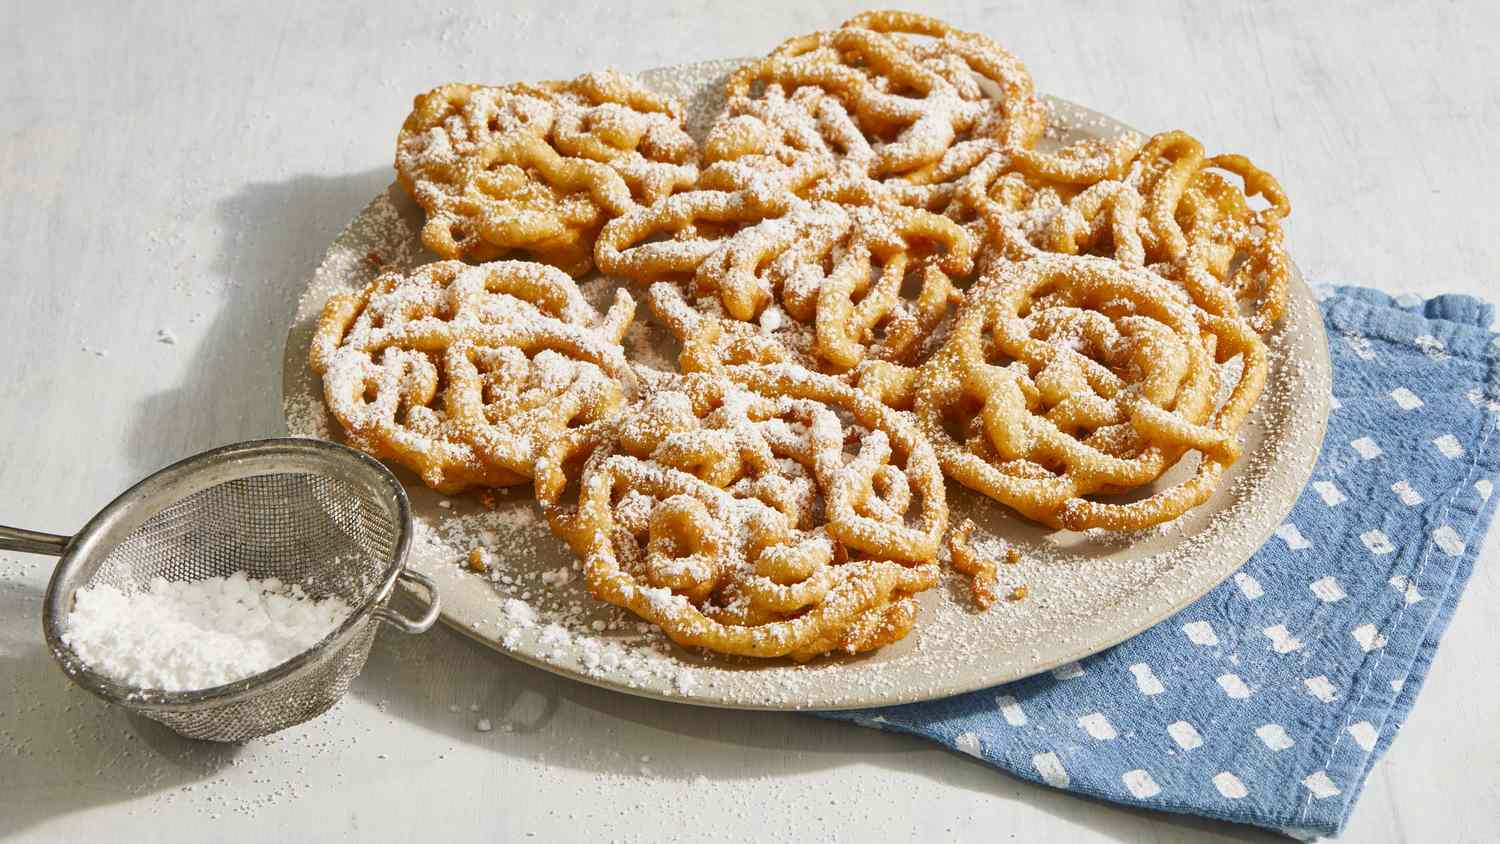 Former Compton Beauty Queen Serves Incredible Funnel Cakes From Home -  Eater LA